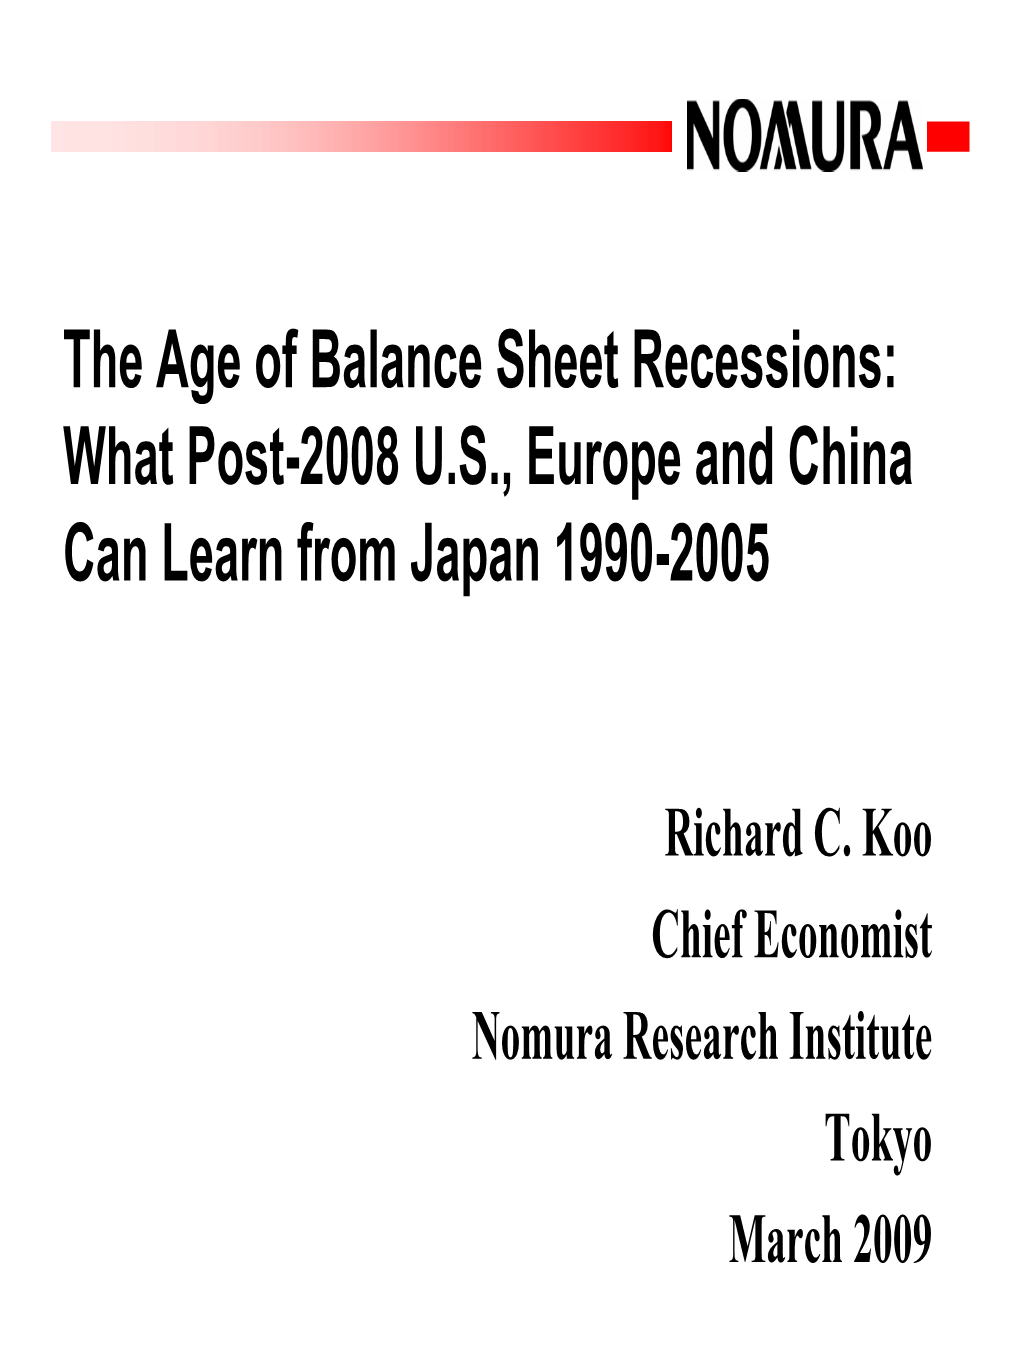 The Age of Balance Sheet Recessions: What Post-2008 U.S., Europe and China Can Learn from Japan 1990-2005